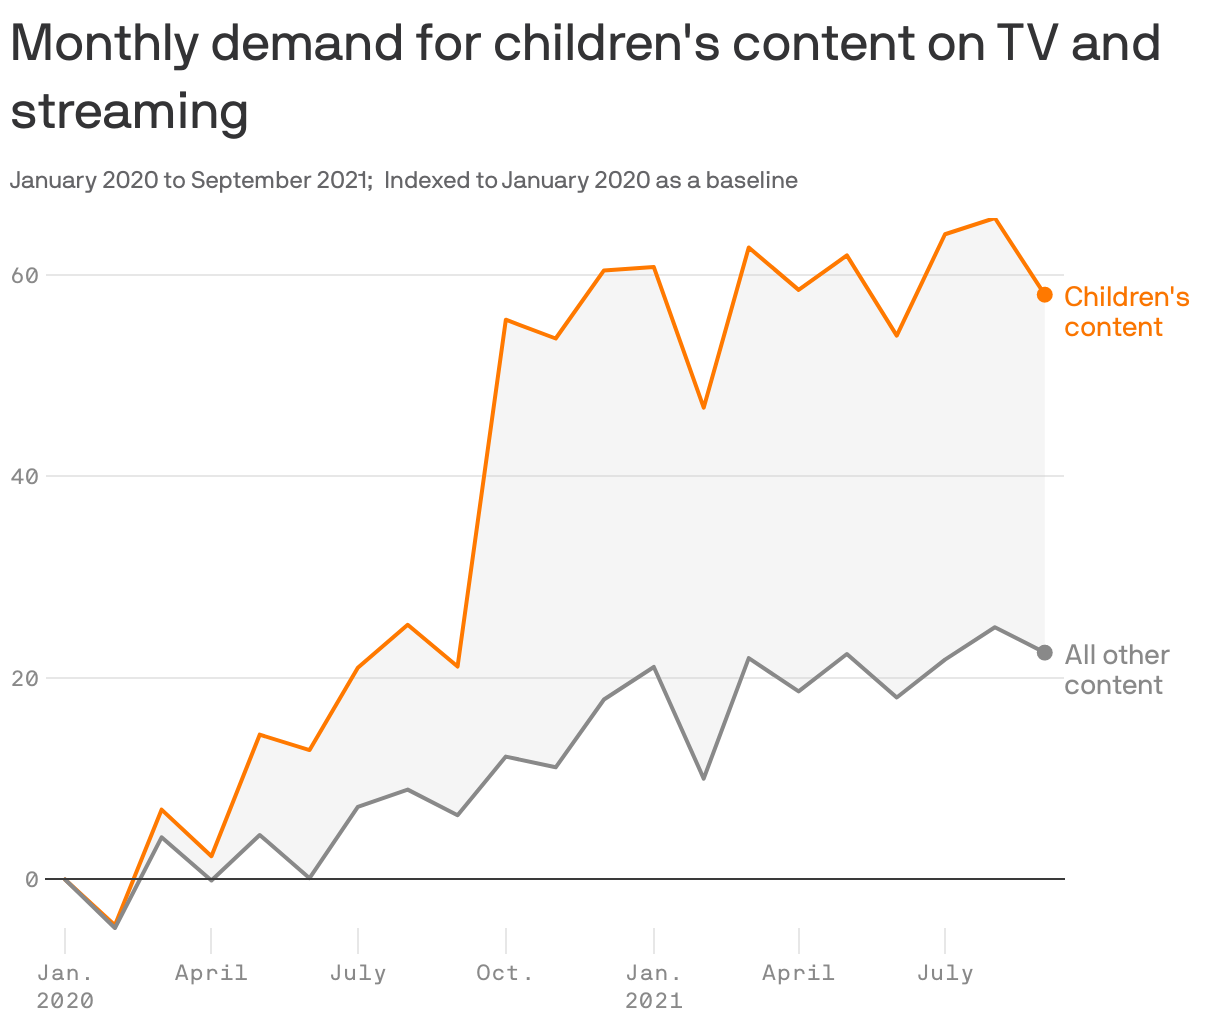 Monthly demand for children's content on TV and streaming